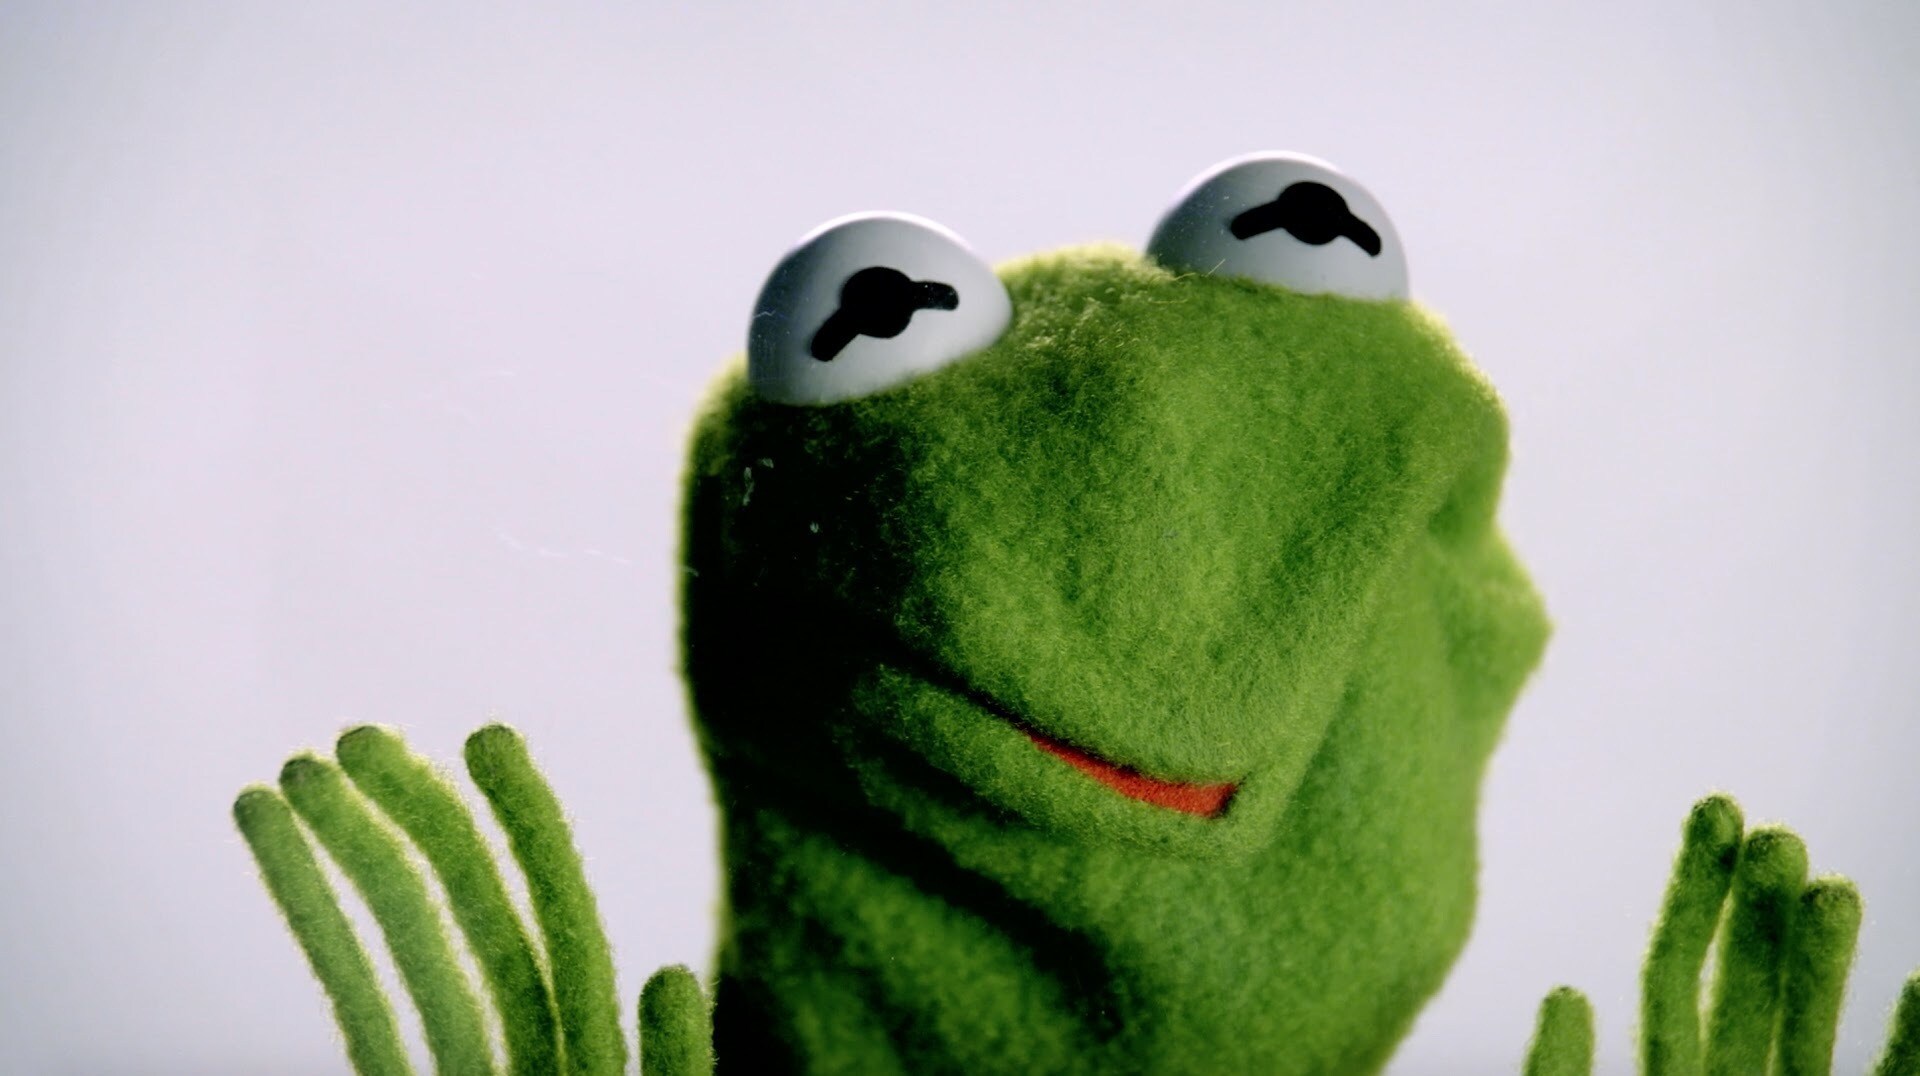 Kermit the Frog Up Close | Muppet Thought of the Week by The Muppets